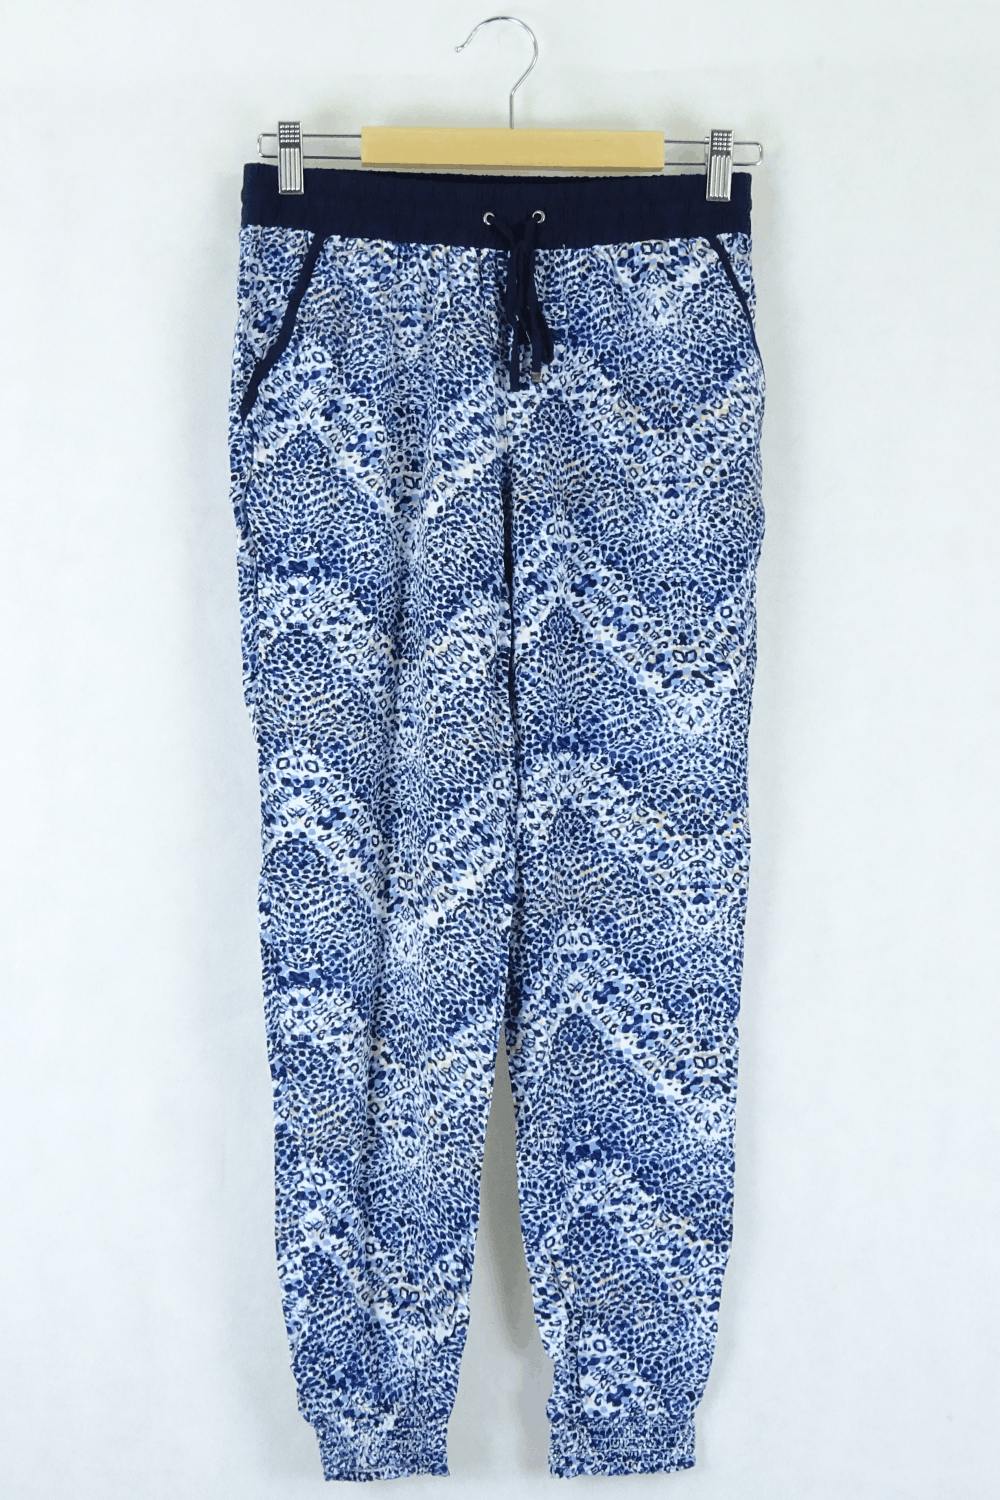 Just Jeans Navy and White Printed Pants 8